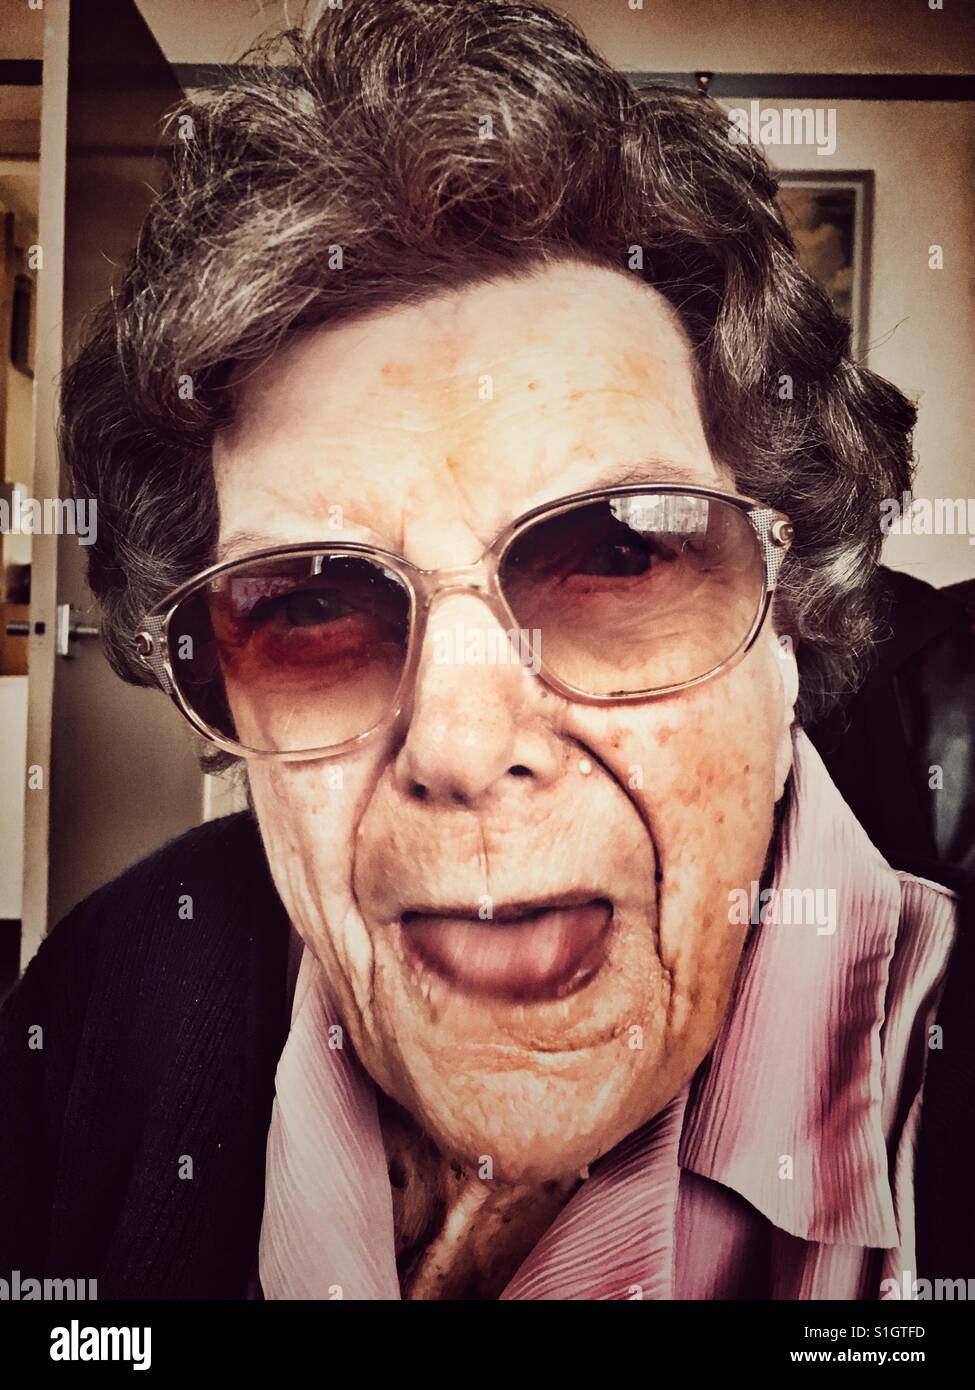 95-year old woman Stock Photo